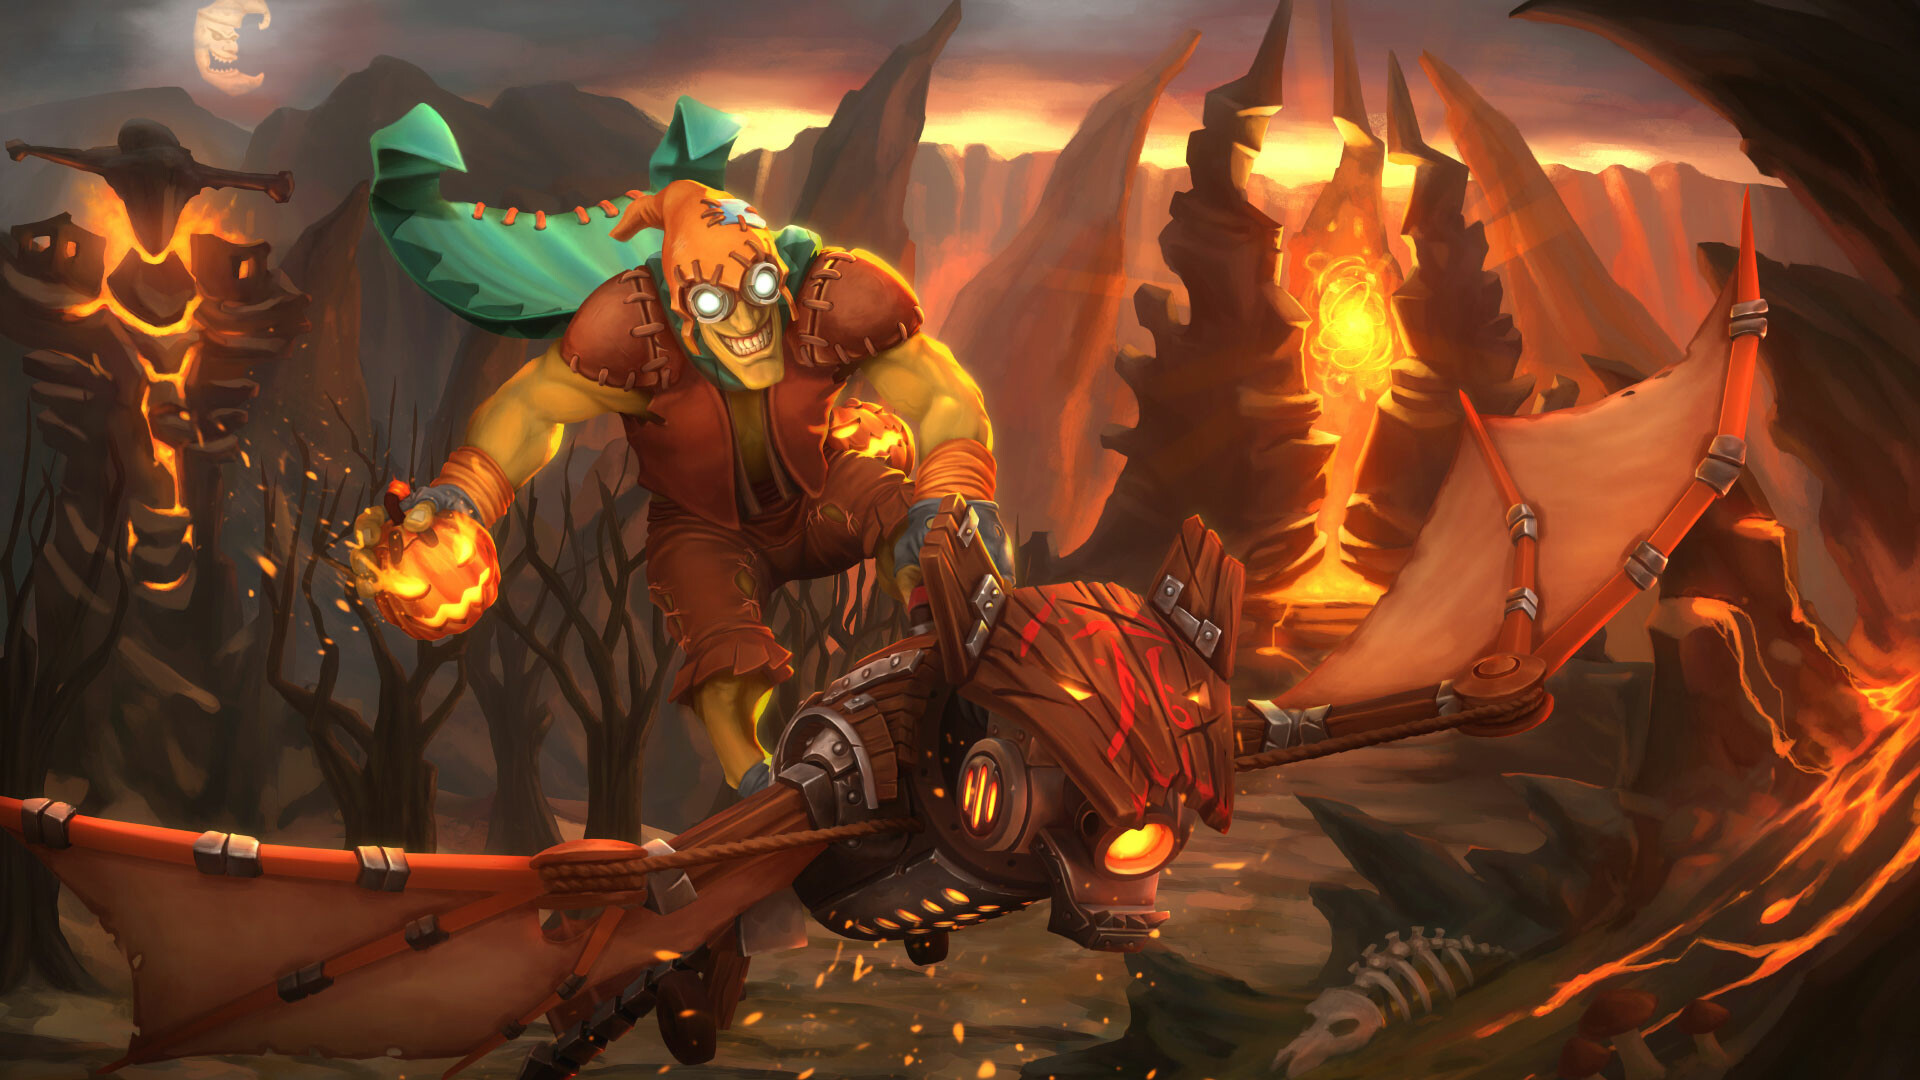 Dota 2: Batrider, Can lasso an enemy away from his team. 1920x1080 Full HD Wallpaper.